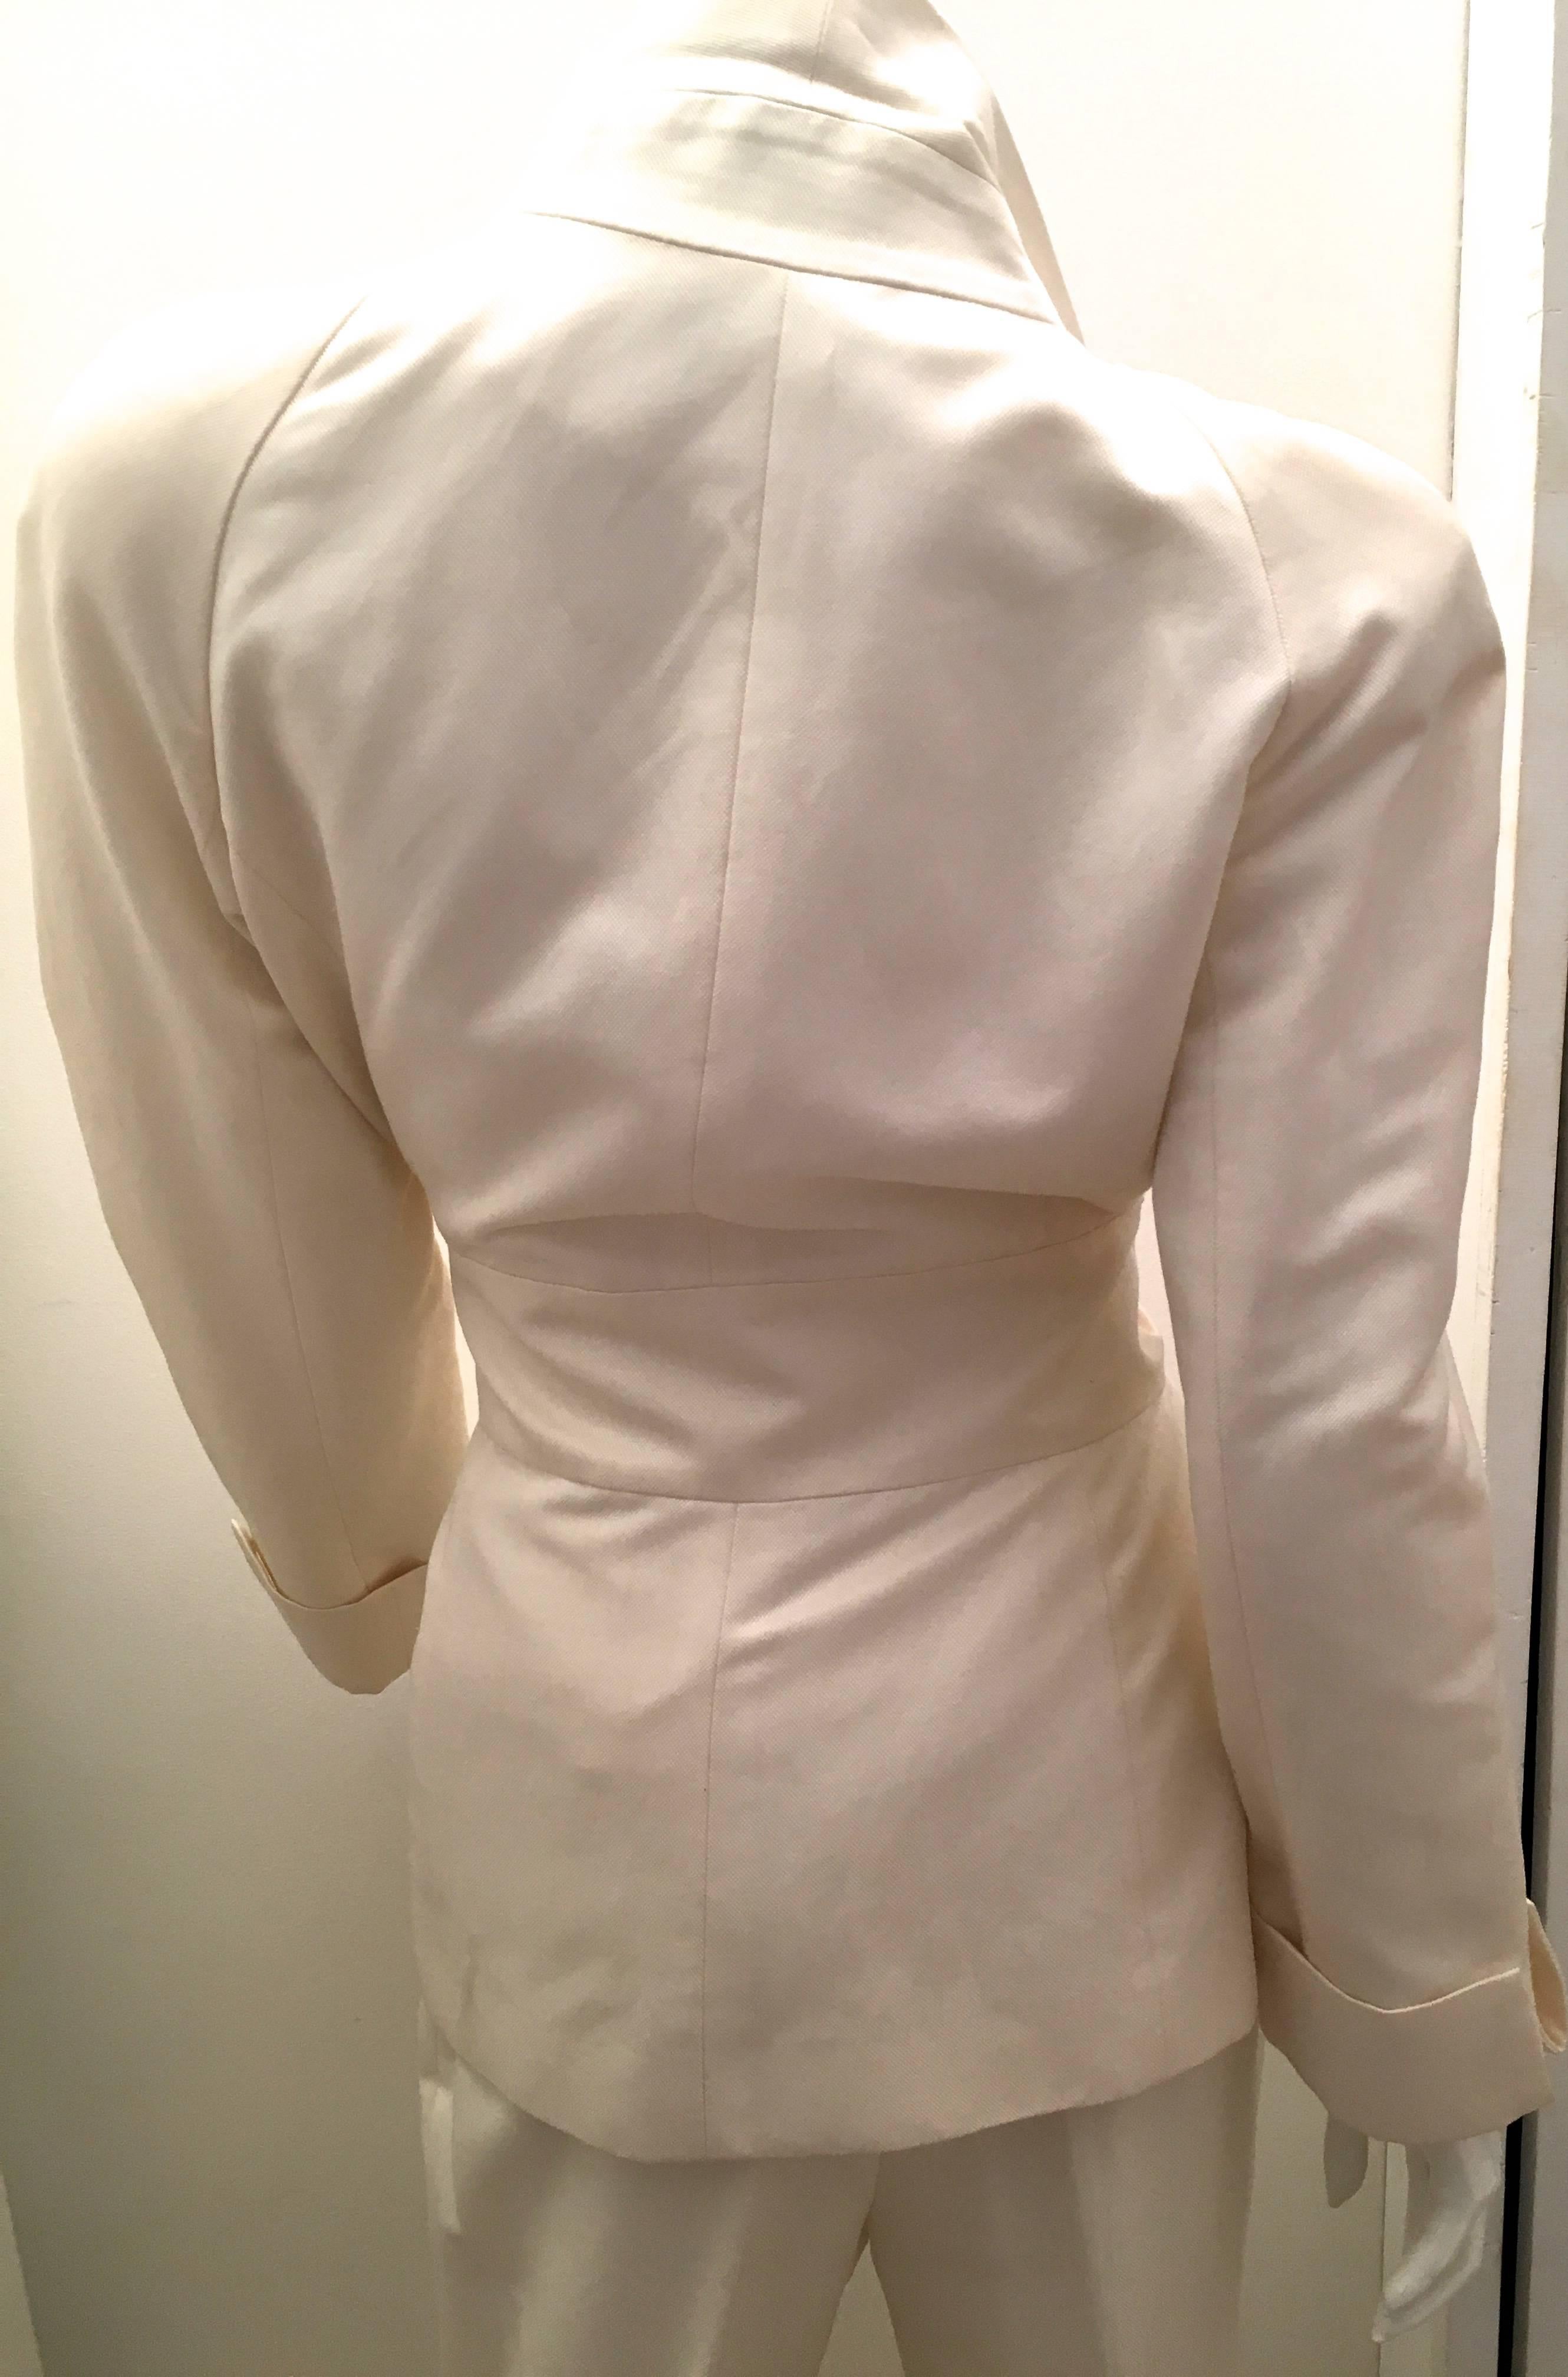 Presented here is a stunning suit from Jean-Louis Scherrer. The suit is a gorgeous white cotton and silk blended fabric entirely lined with white silk and it appears to have  been worn perhaps once or twice. The suit has a connected white belt tie